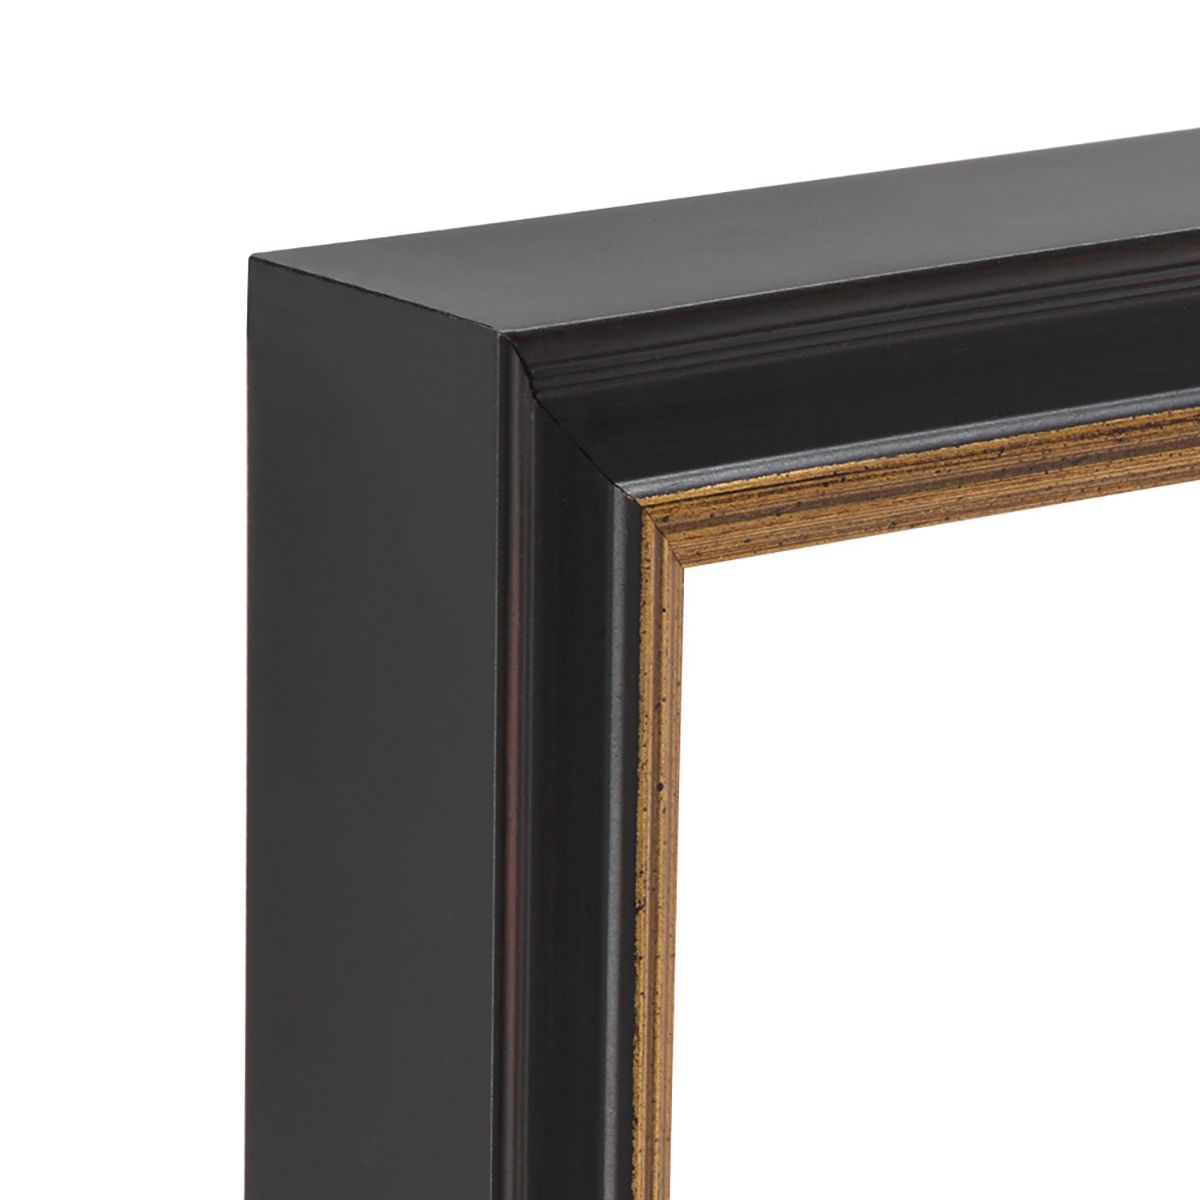 Millbrook Collection: Academy Black 3/4" Frame 11"x14" With Glass